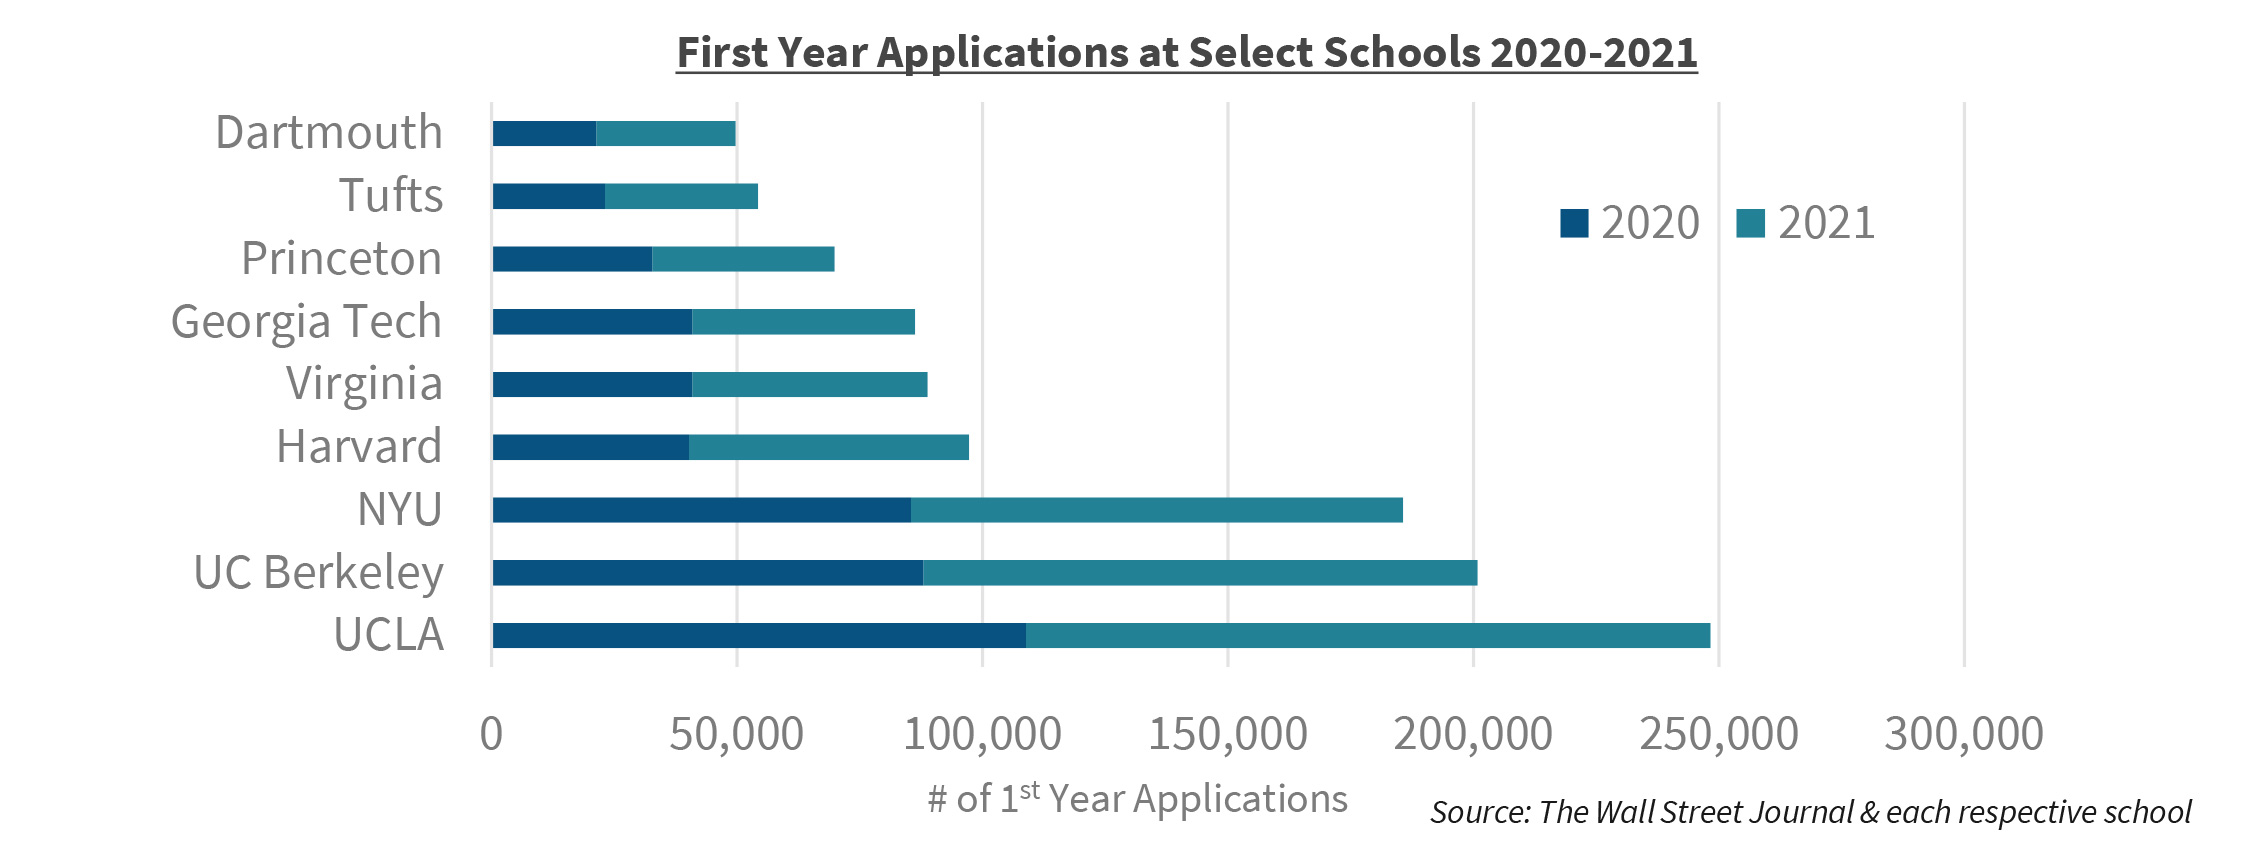 First Year Applications at Select Schools 2020-2021